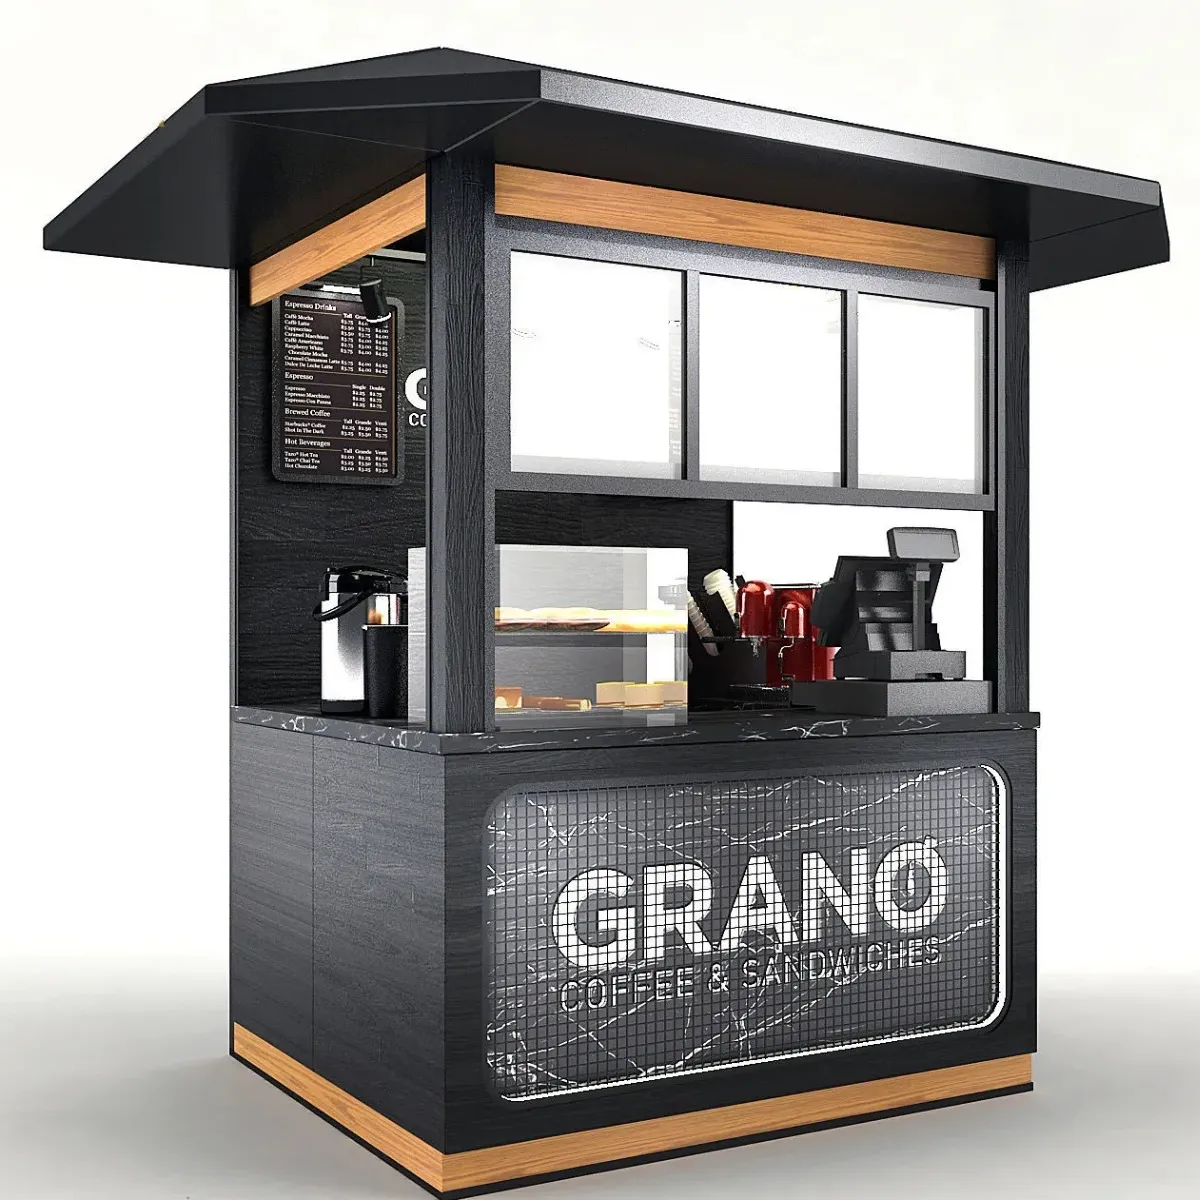 Outdoor Cafe Retail Booth Coffee Closed Bar Metal Expresso Outside Selling Kiosk